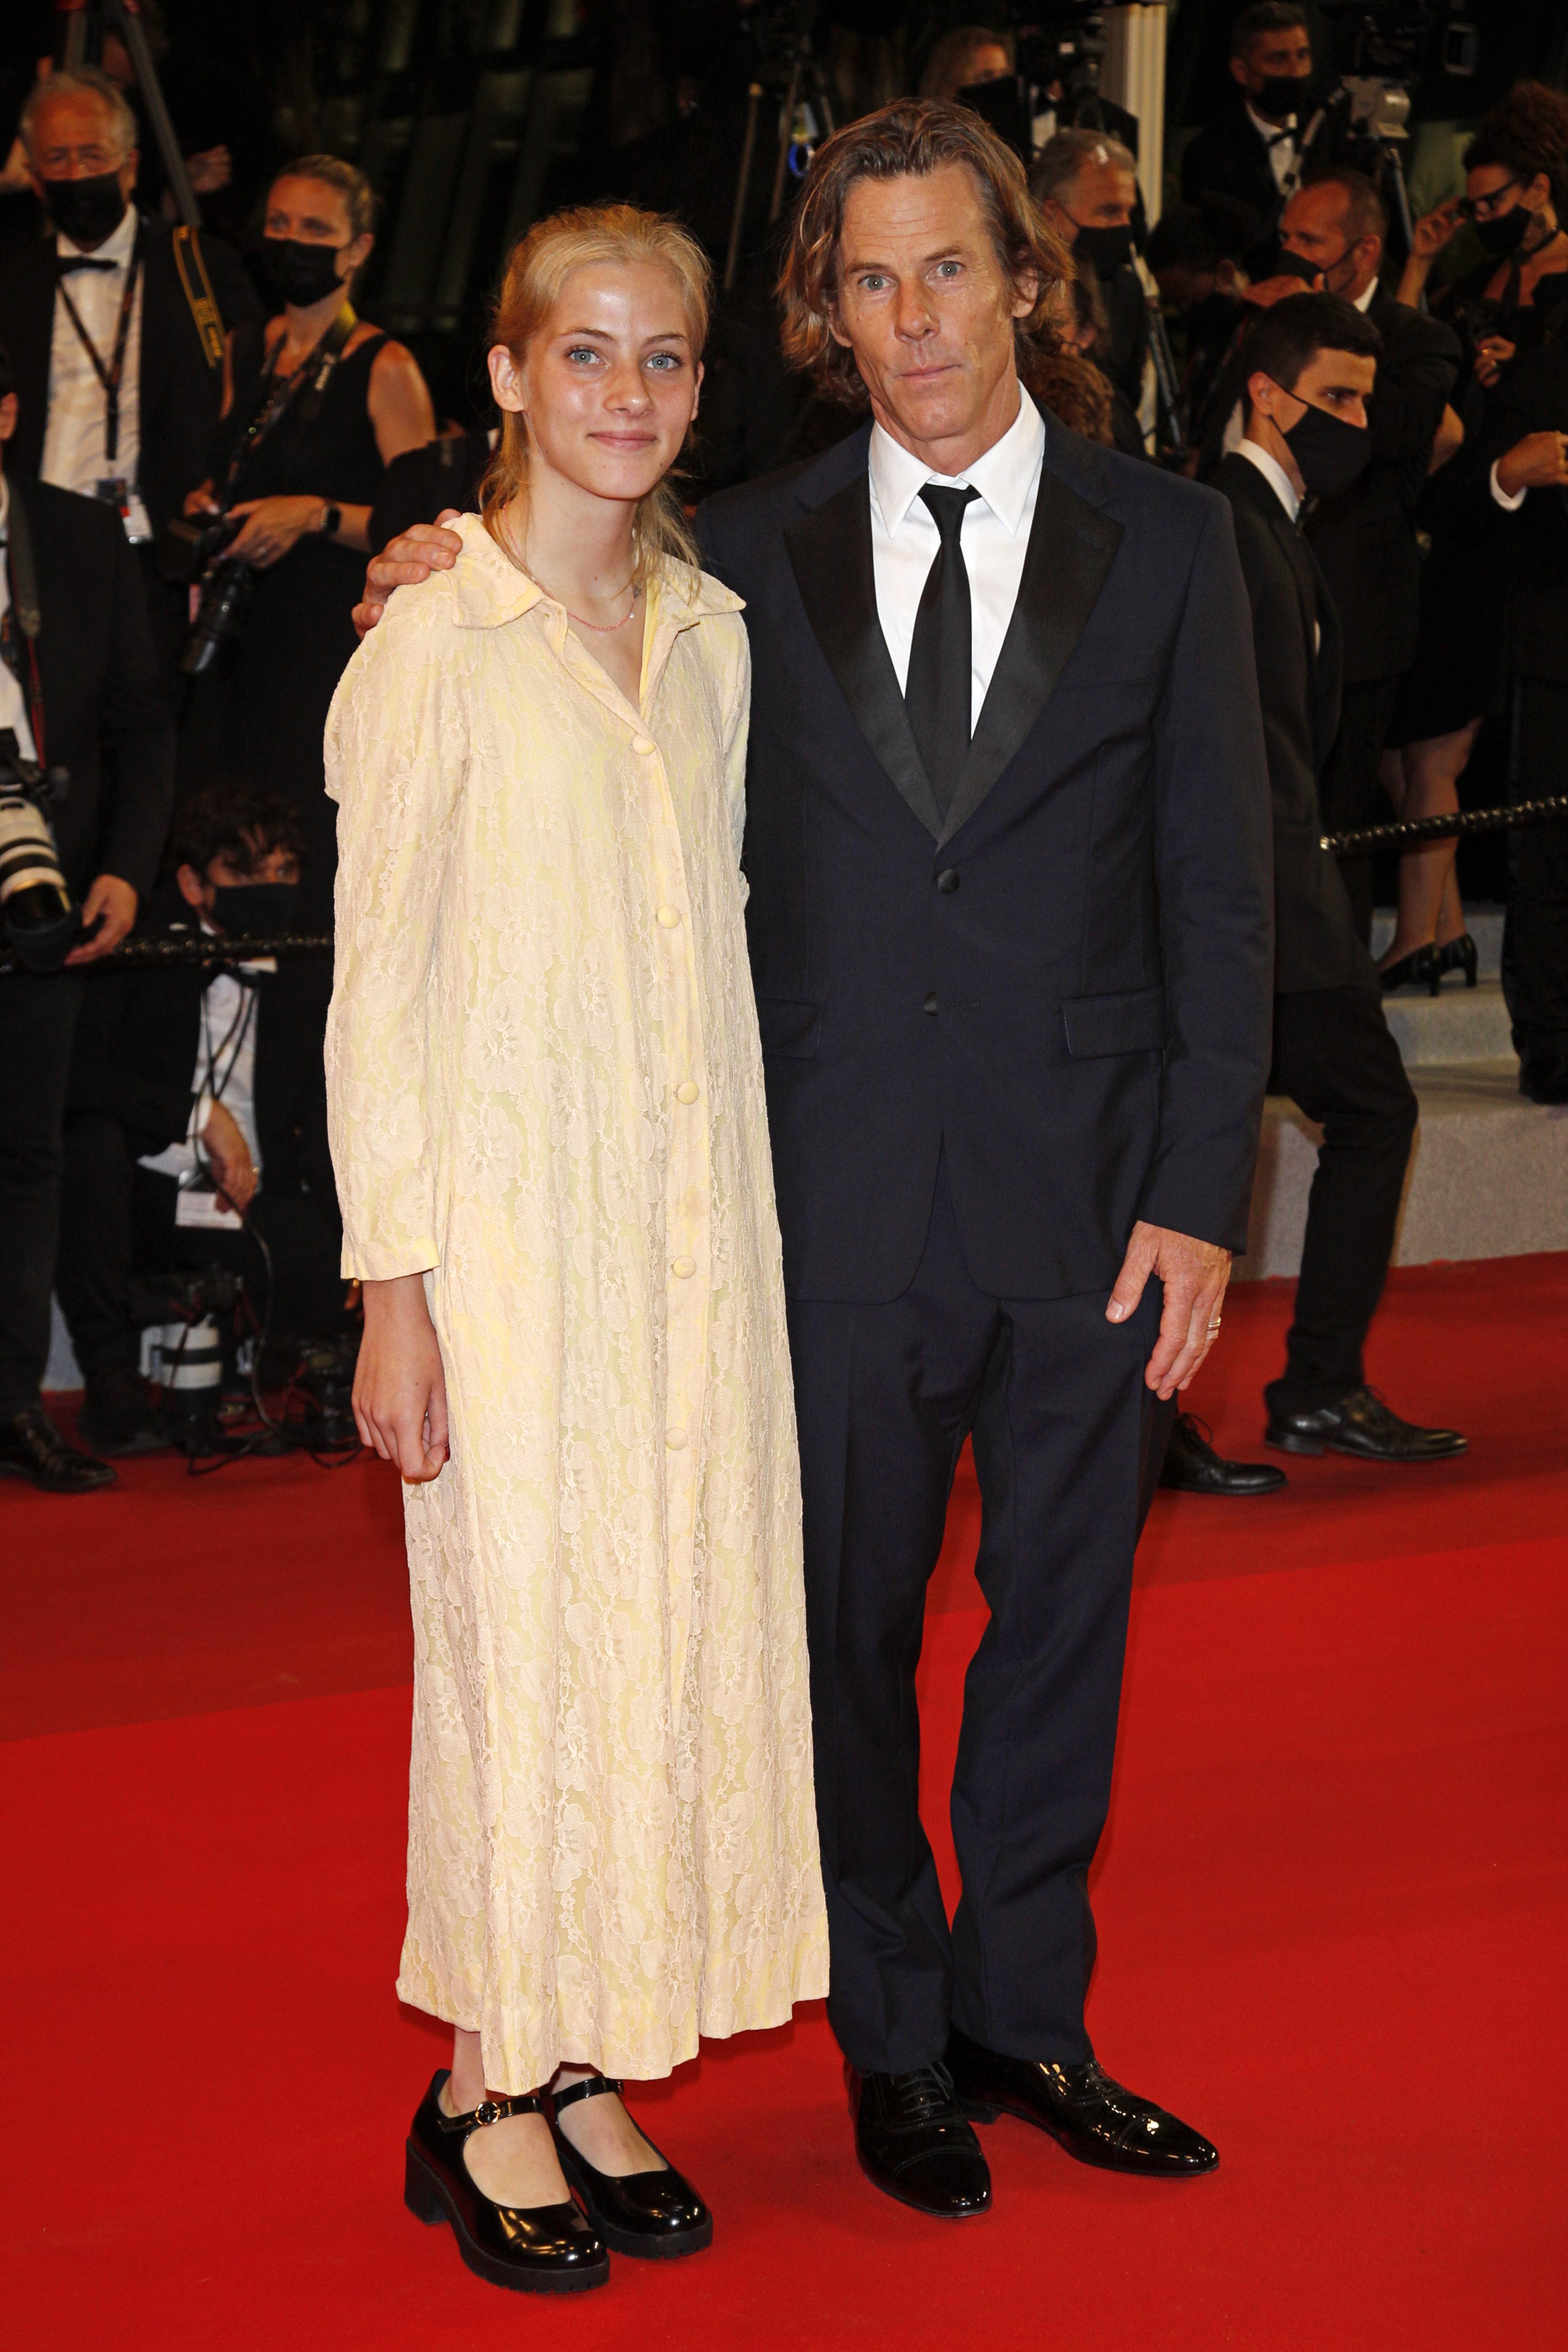 Danny Moder and daughter Hazel Moder arrive at the premiere of 'Flag Day' during the 74th Cannes Film Festival held at the Palais des Festivals in Cannes, France | Source: Getty Images